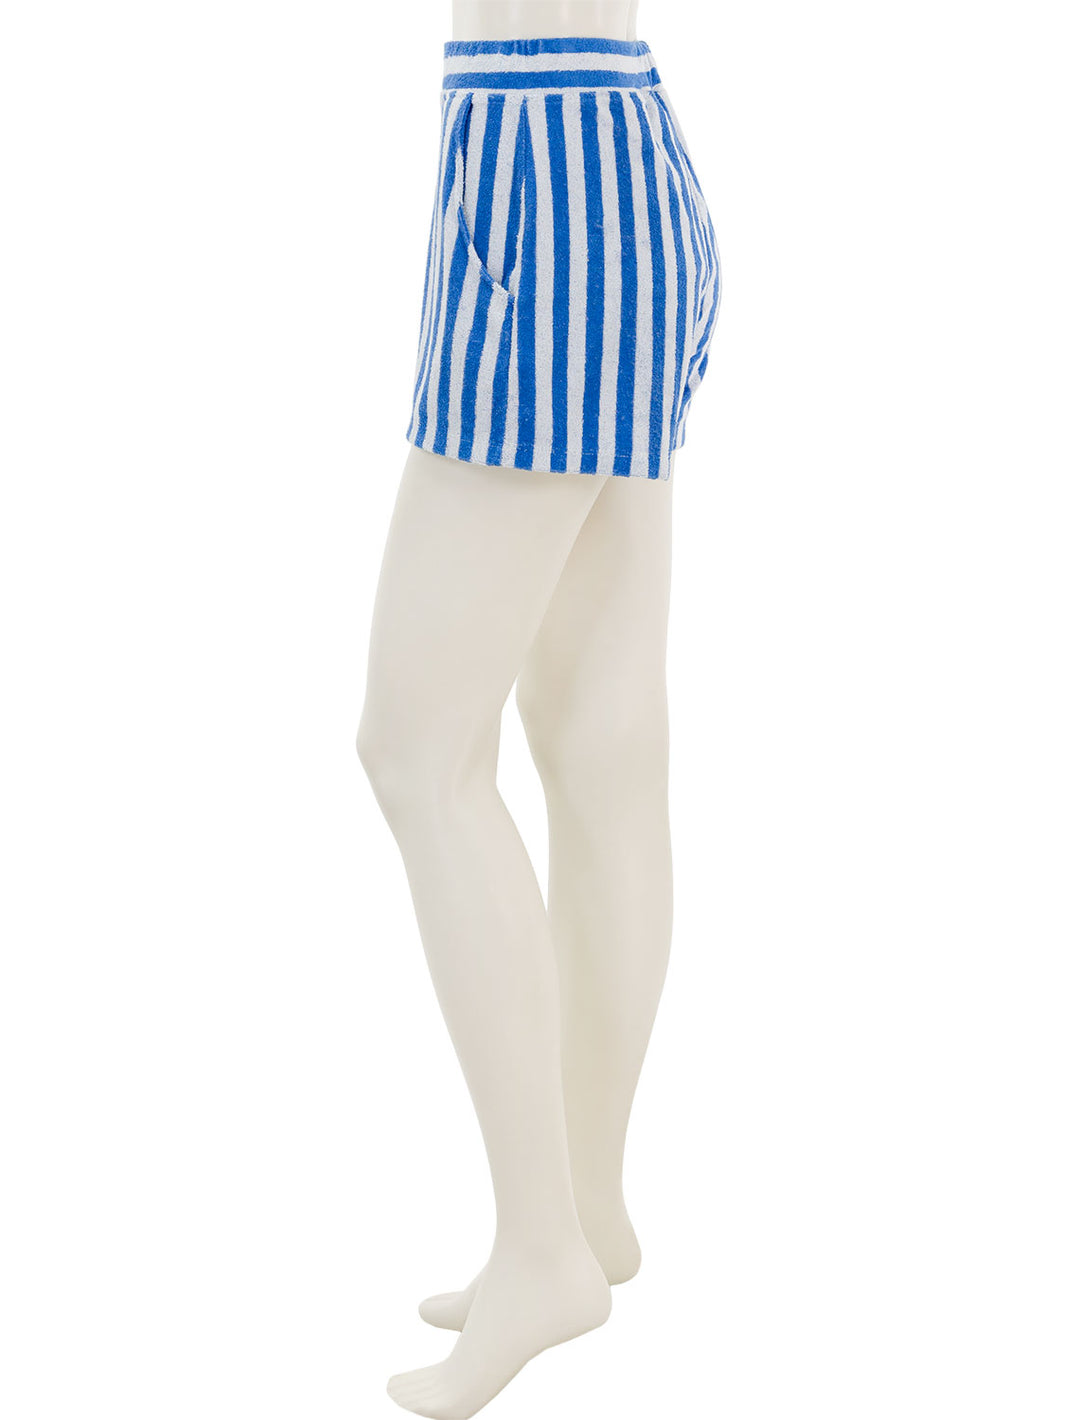 Side view of KULE's the terry venus in royal and poppy stripe.